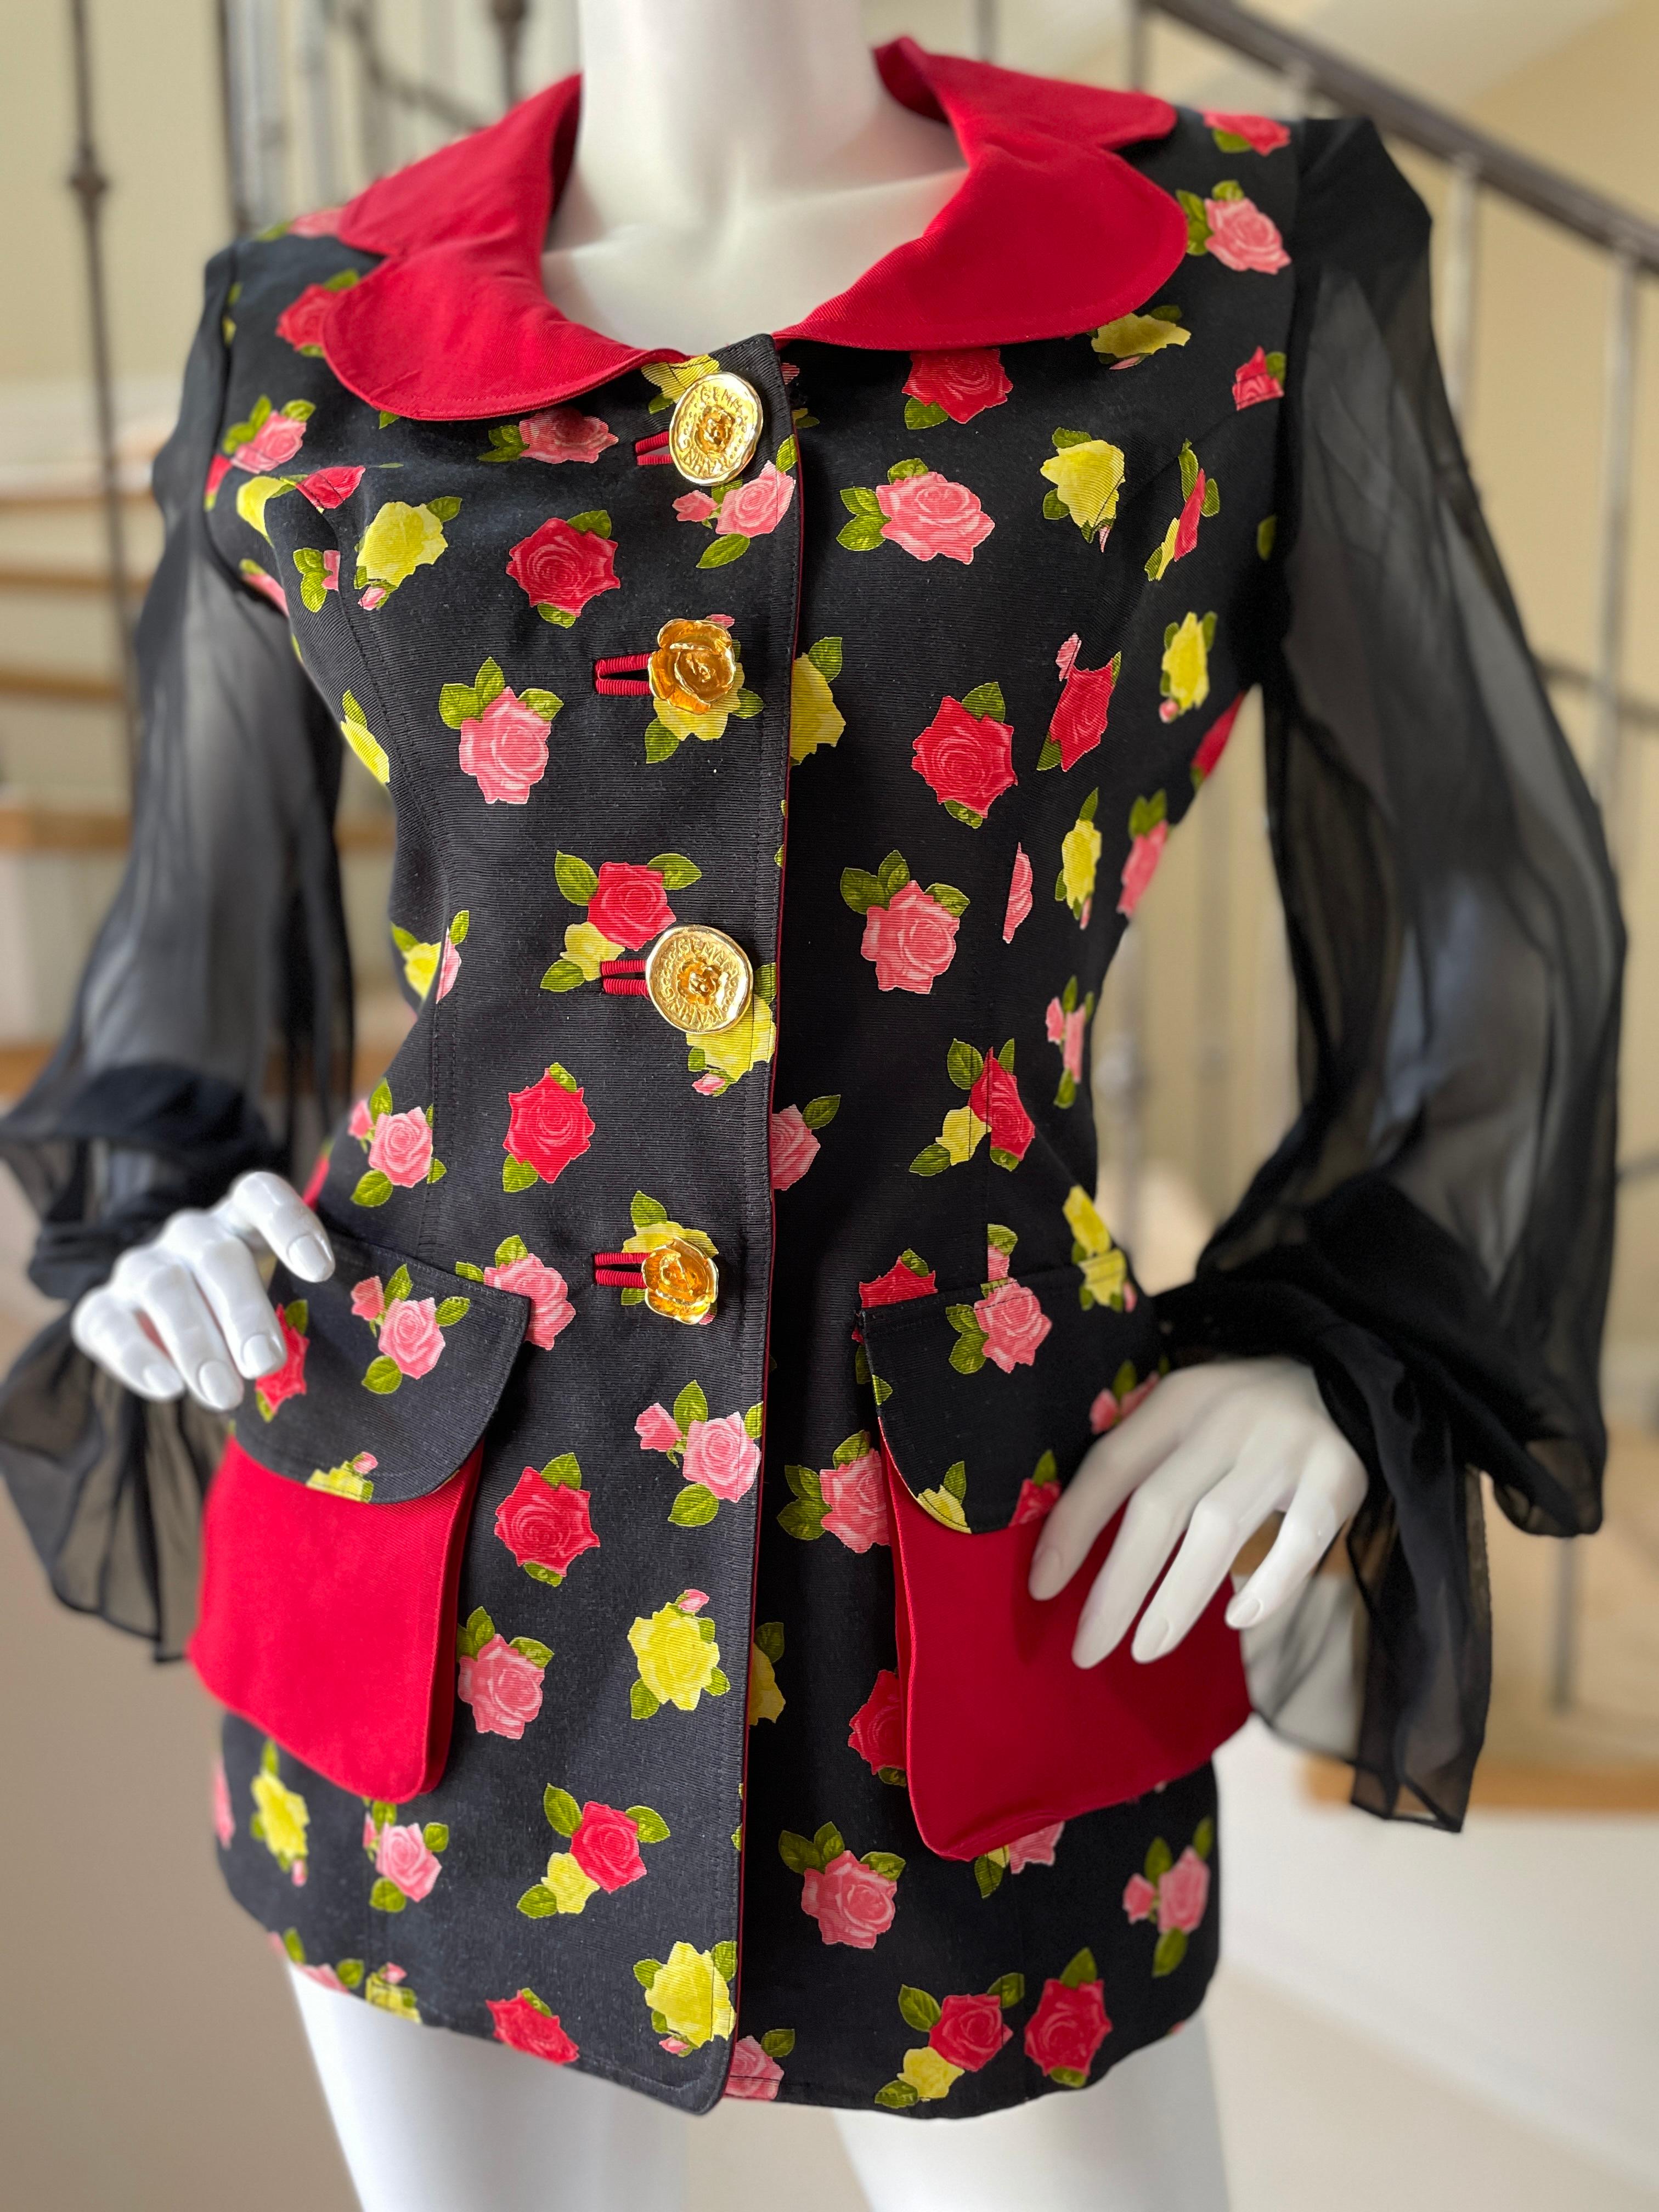 Gemma Kahng for Bergdorf Goodman 1980's Floral Evening Jacket with Sheer Sleeves In Excellent Condition For Sale In Cloverdale, CA